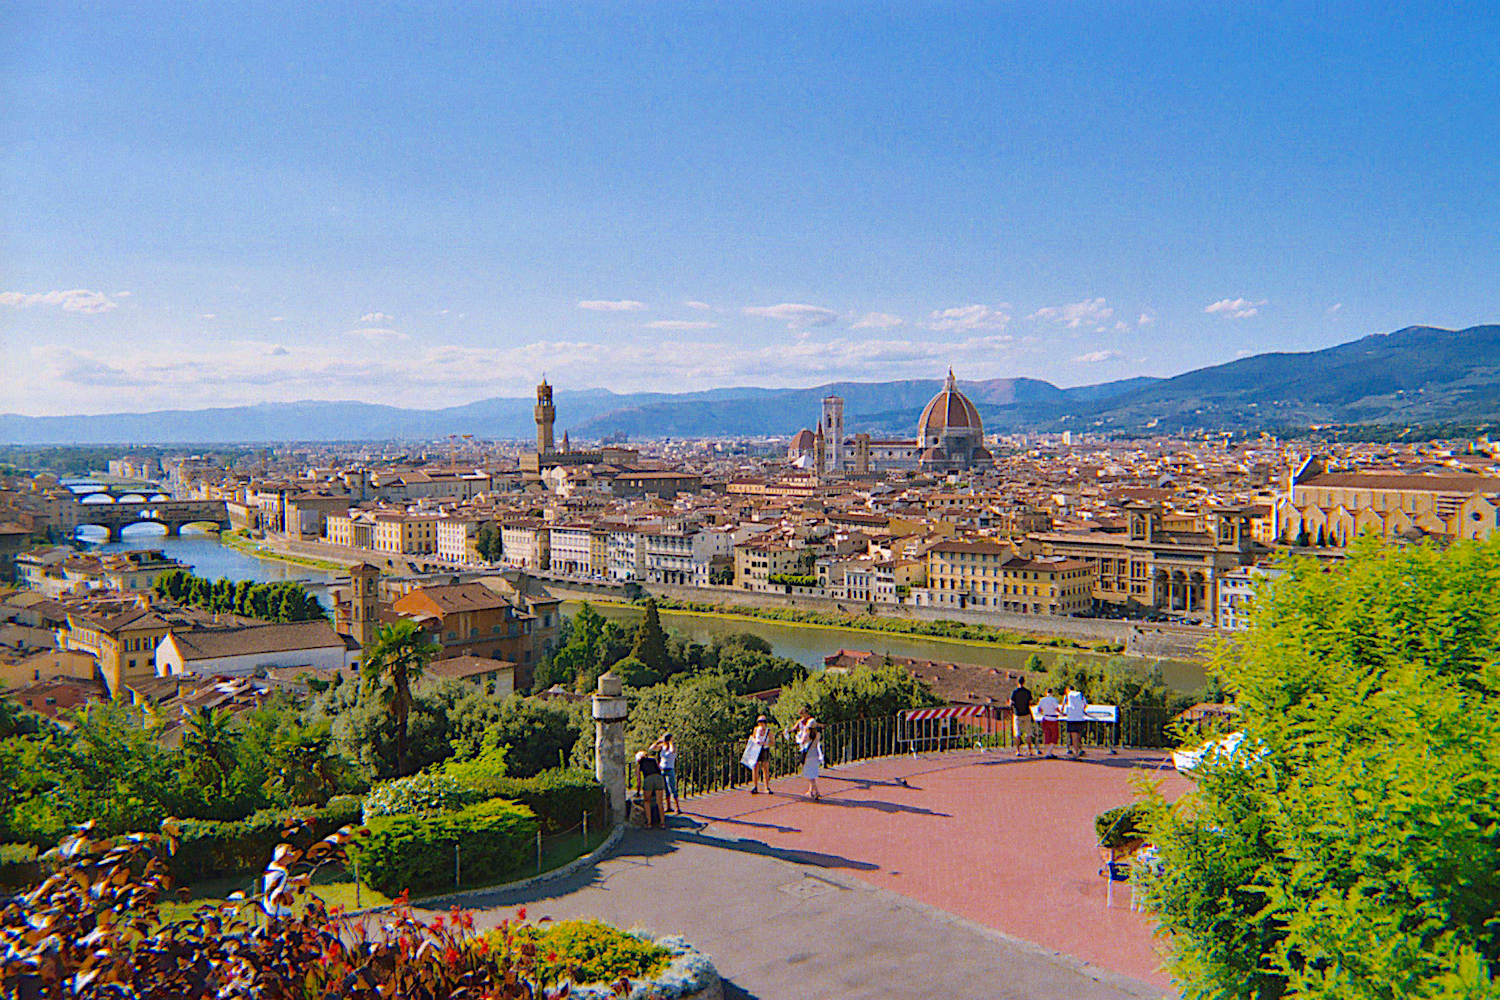 Panoramic view of Florence and its magnificent Duomo by Brunelleschi